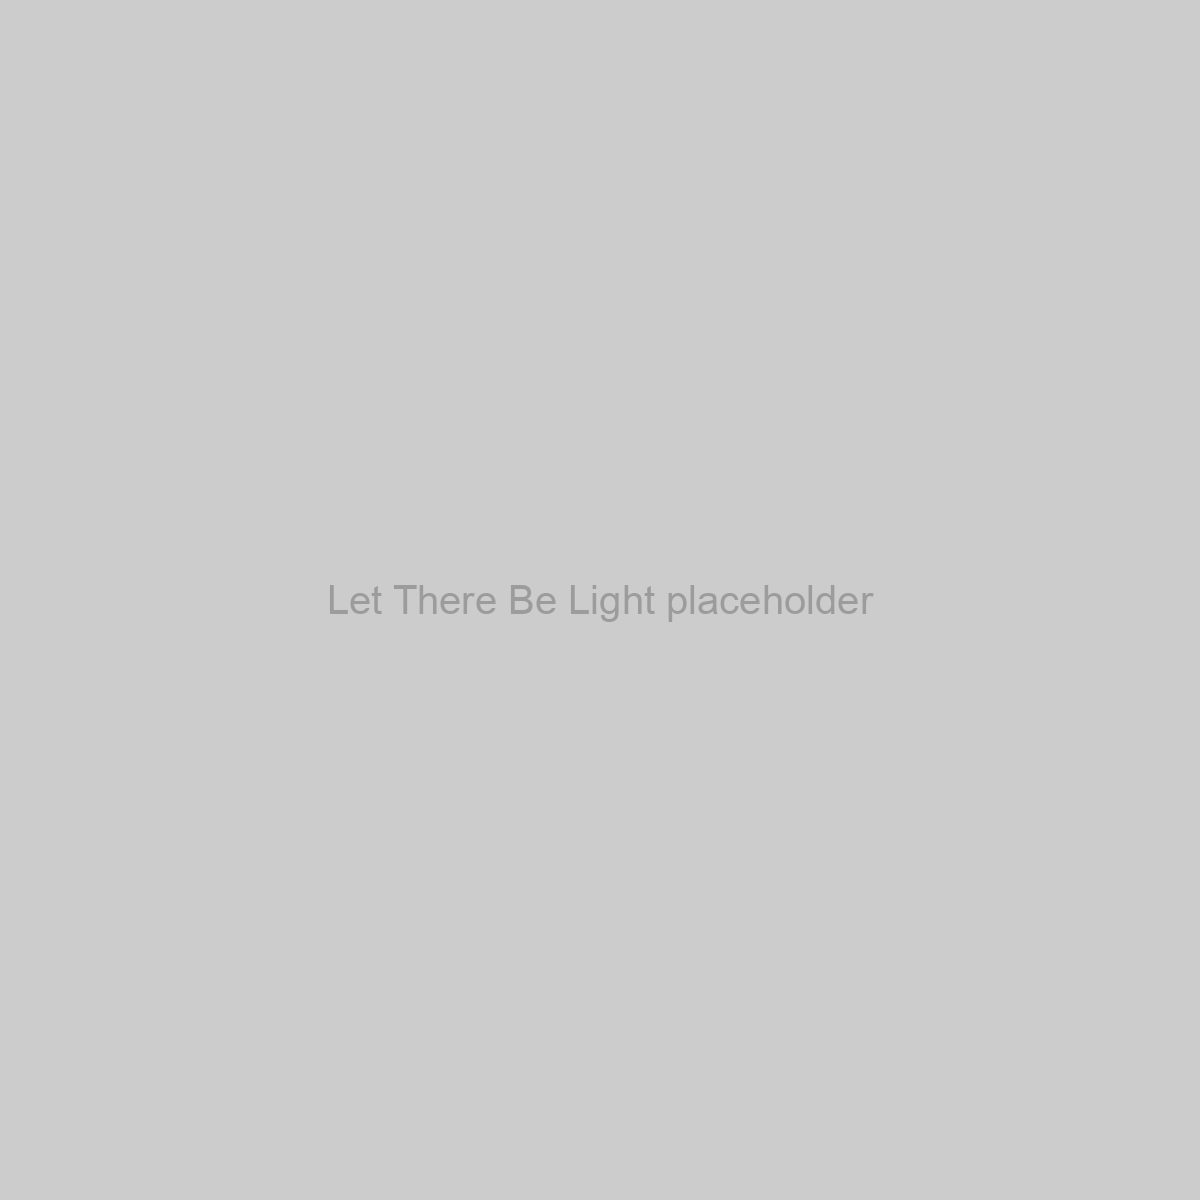 Let There Be Light Placeholder Image